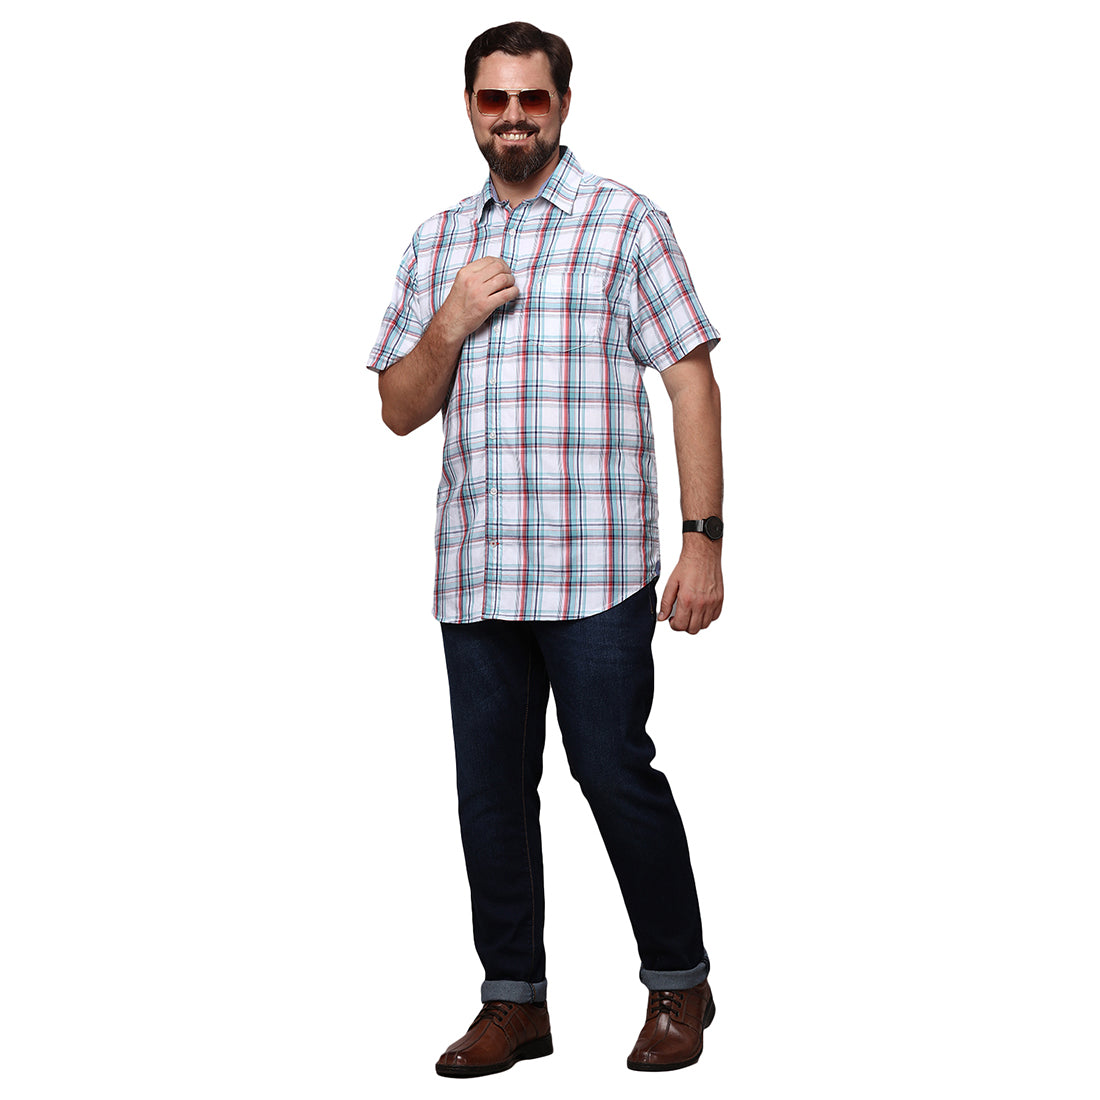 Big & Bold Checks Teal Half Sleeves Slim Fit Casual Shirts (Plus Size) - Double Two